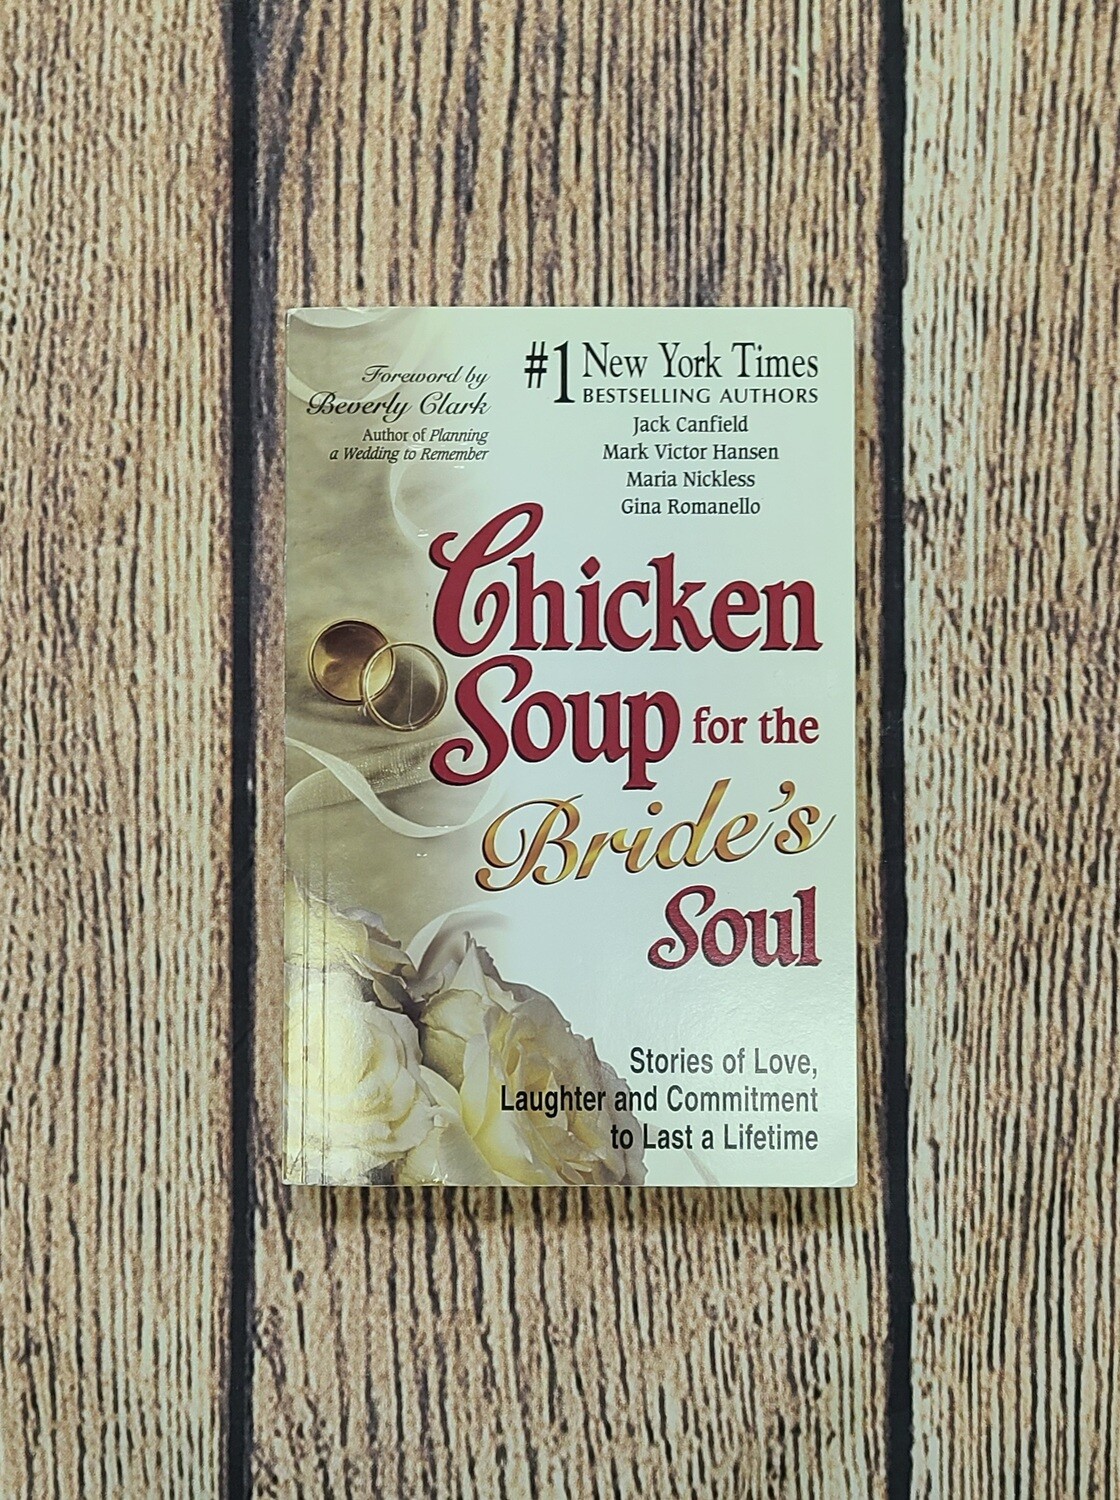 Chicken Soup for the Bride's Soul by Jack Canfield, Mark Victor Hansen, Maria Nickless, and Gina Romanello